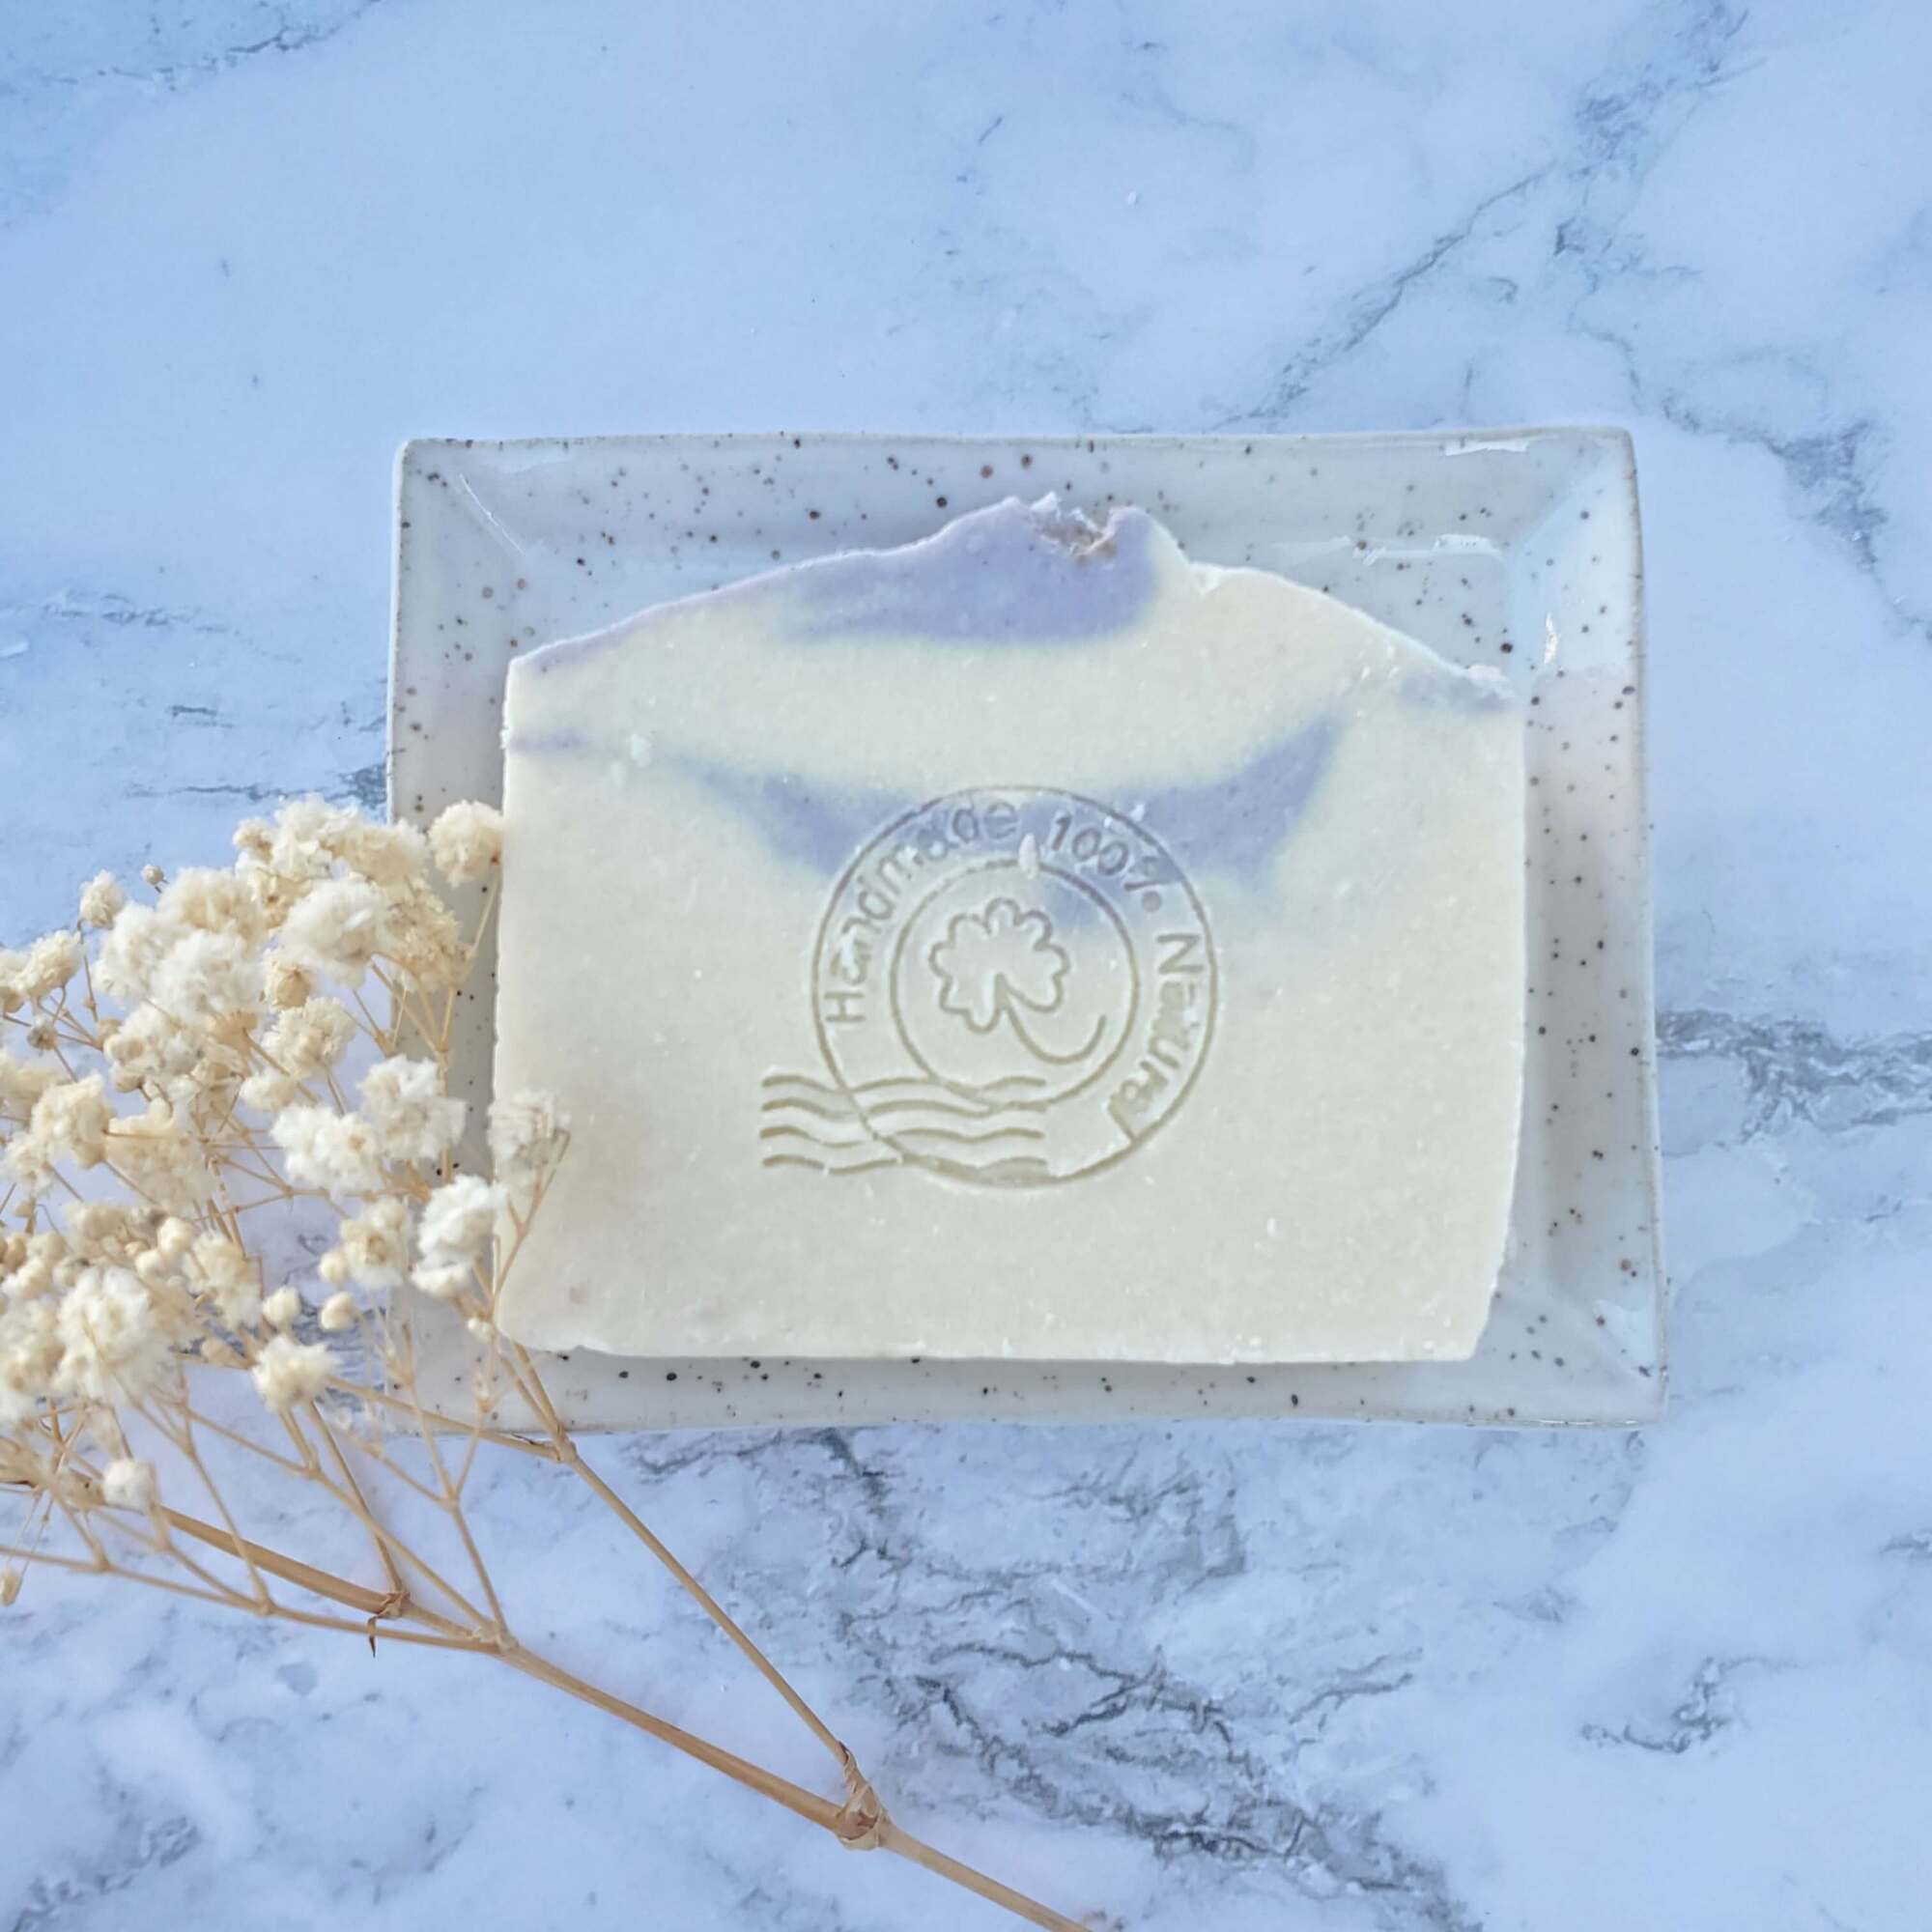 New tender care lavender and oat milk bar soap by Tender care : review -  Bath & shower